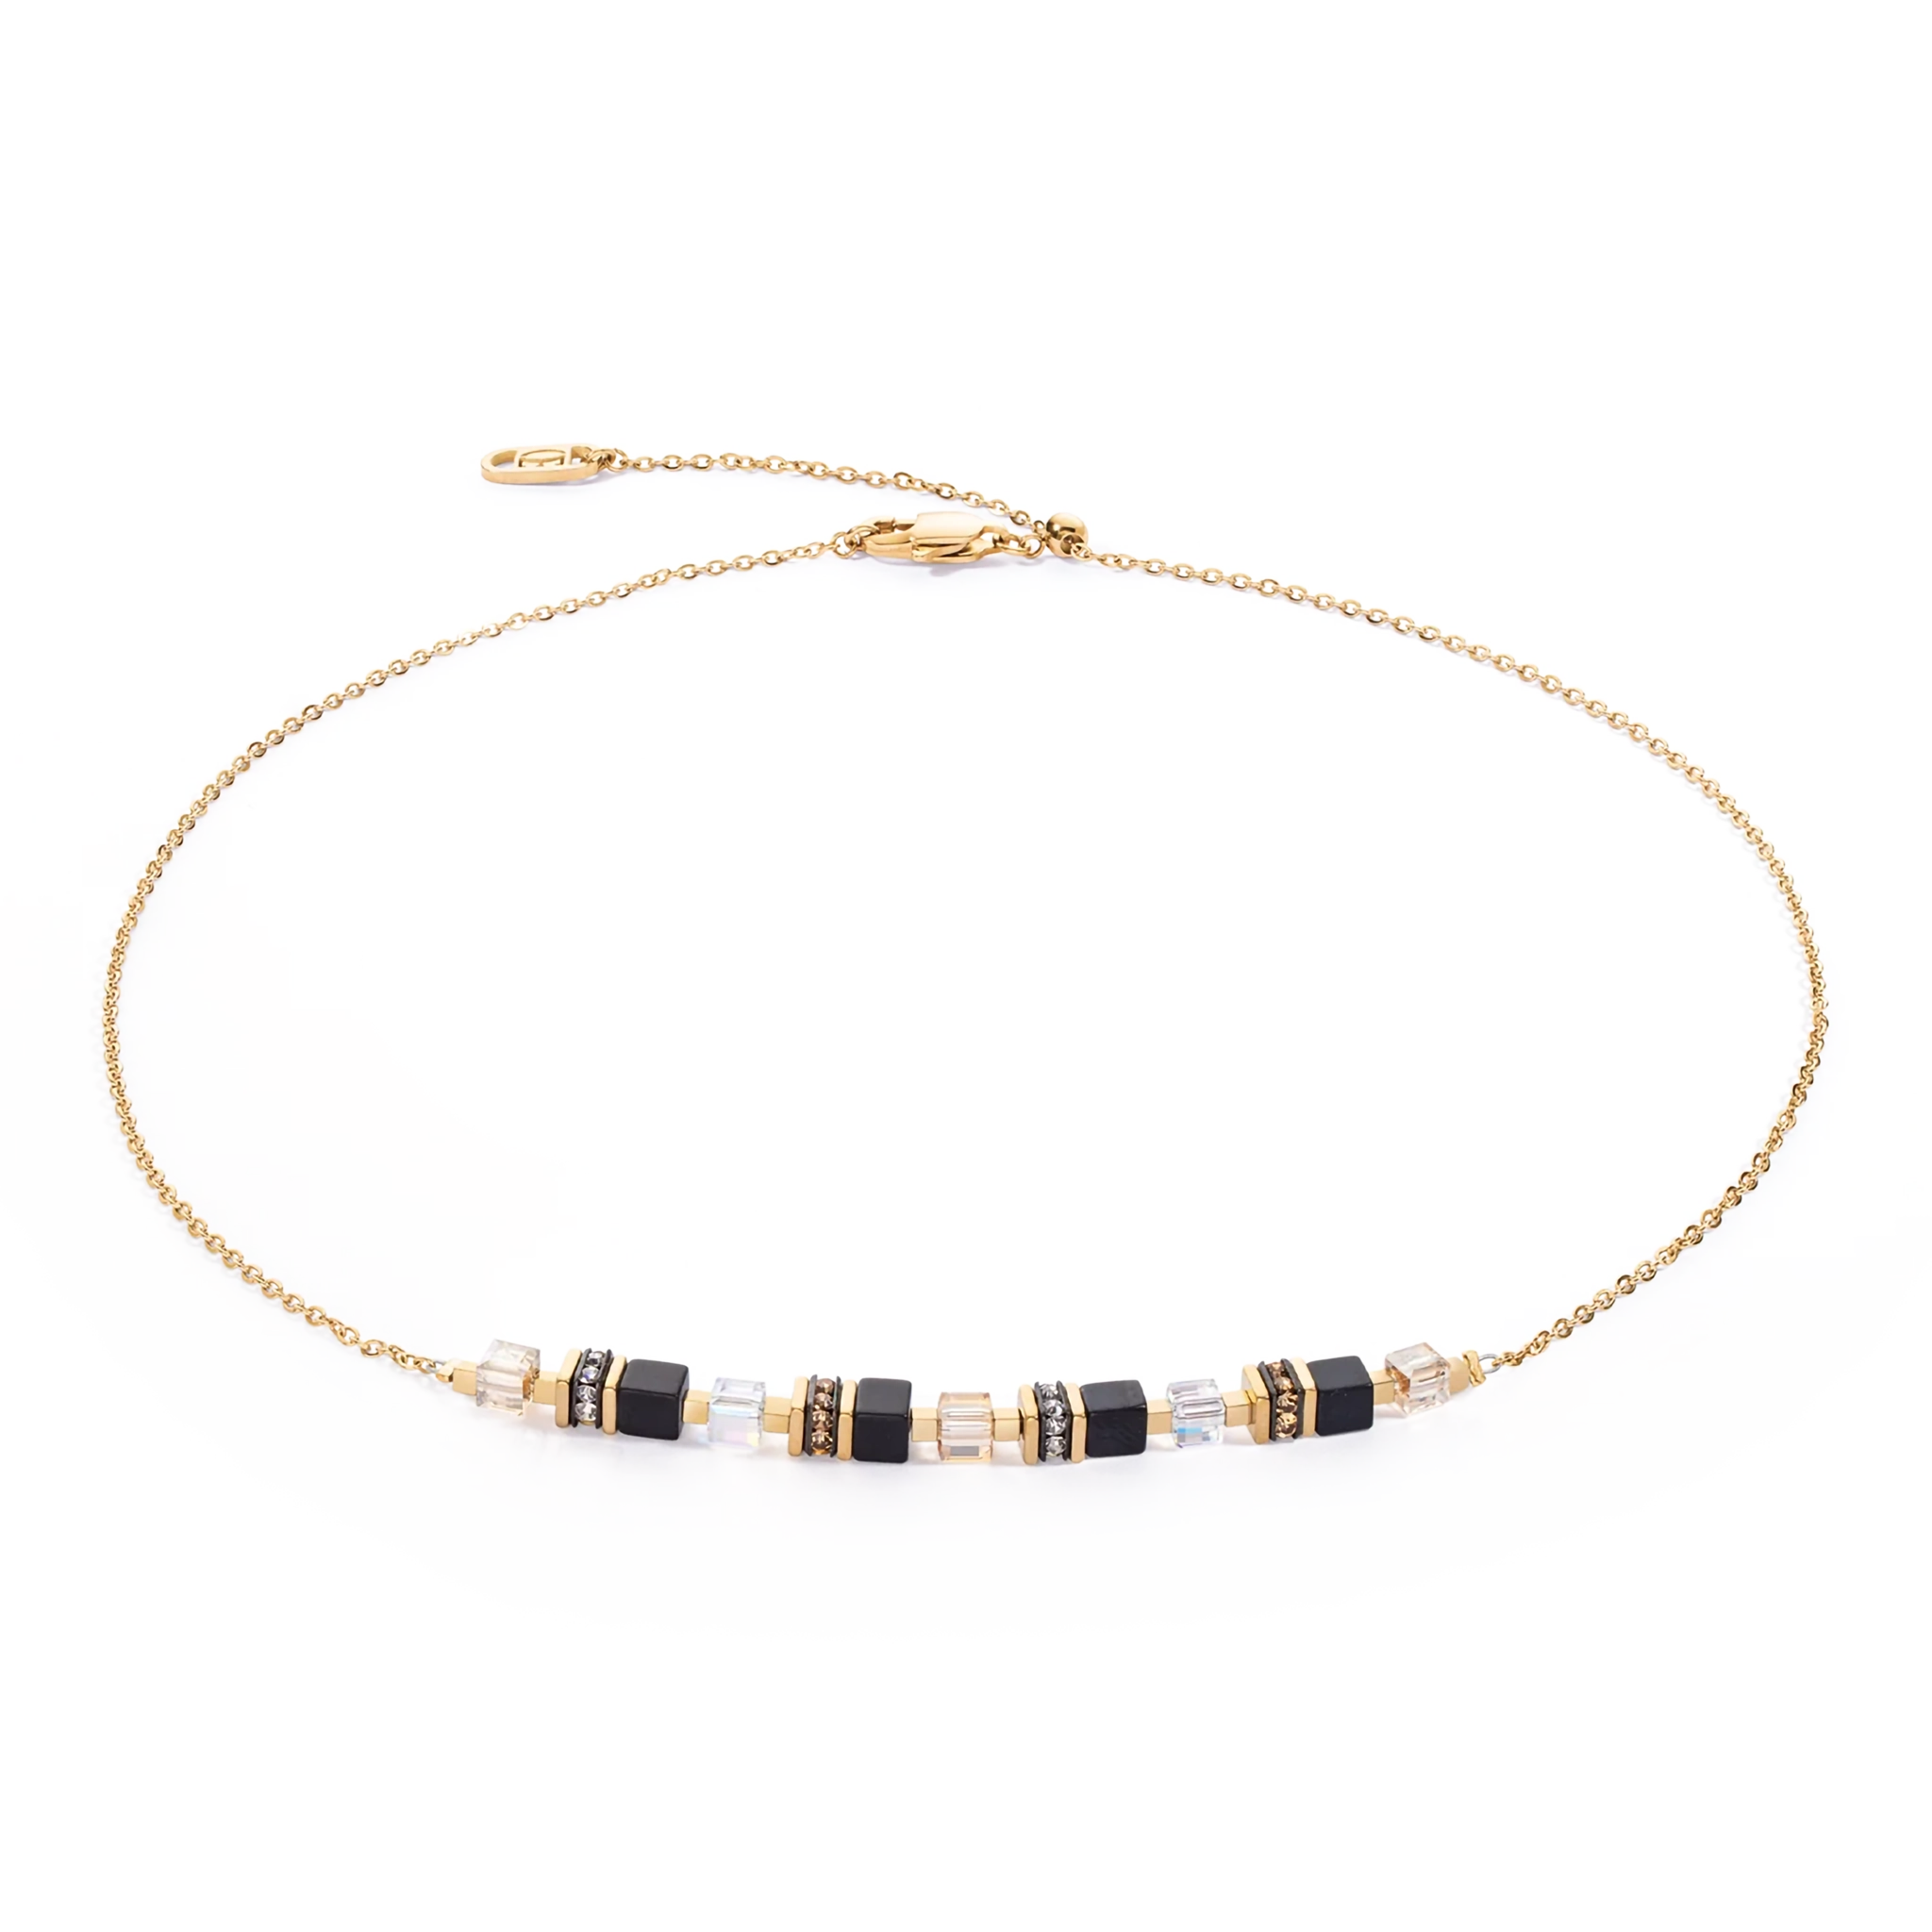 A gold chain necklace with black cube shaped stones